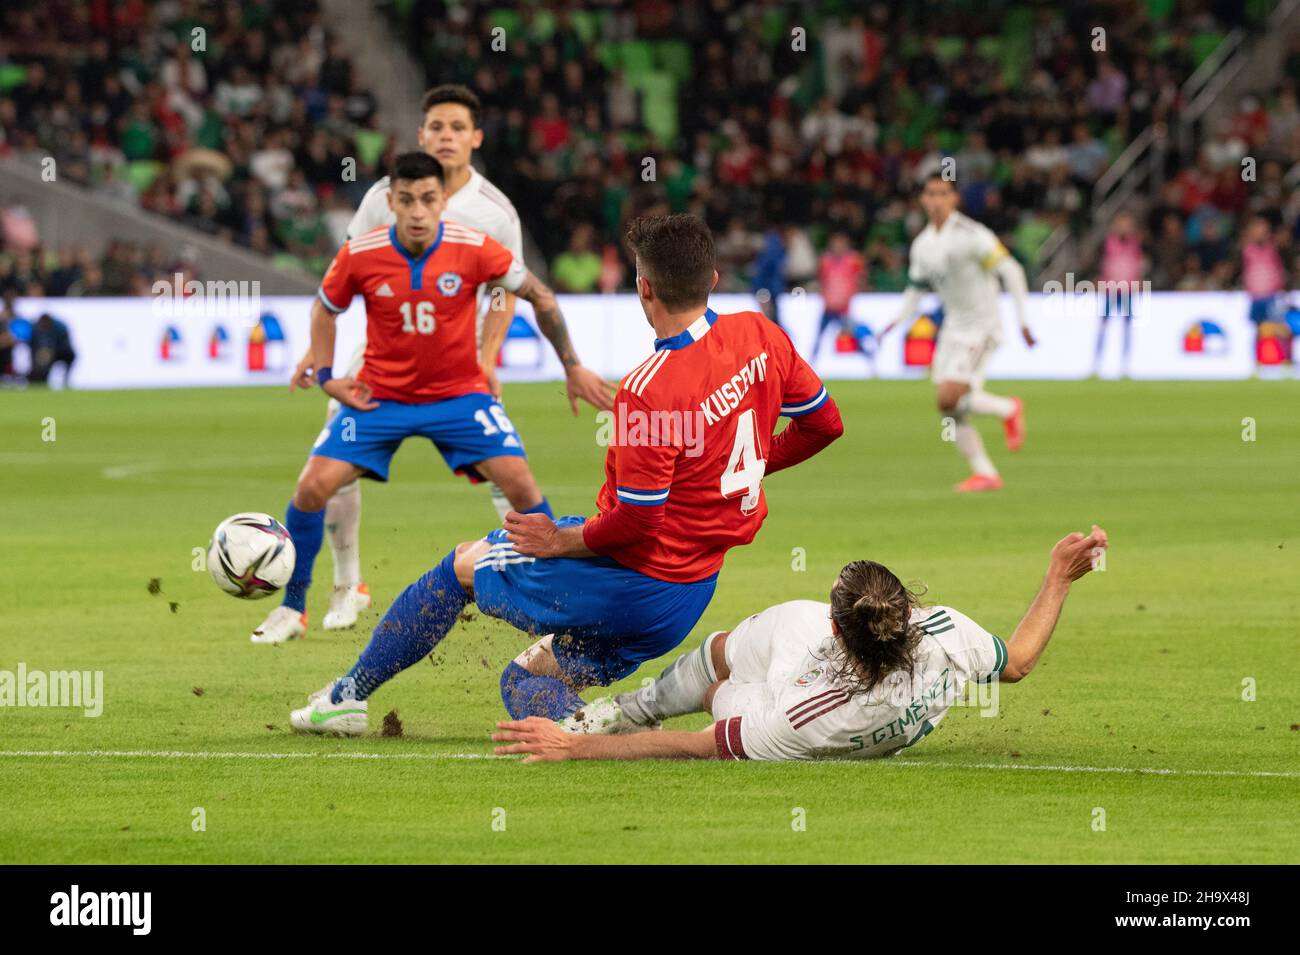 Austin, Texas, USA. 8th December, 2021. Mexico's SANTIAGO GIMENEZ (9) slides under BENJAMIN KUSCEVIC (4) of Chile during the first half of a Mexico National Team vs. Chile friendly at Austin's Q2 Stadium. The teams were tied, 2-2 after regulation play. At left is #16 CLAUDIO BAEZA of Chile. Credit: Bob Daemmrich/Alamy Live News Stock Photo